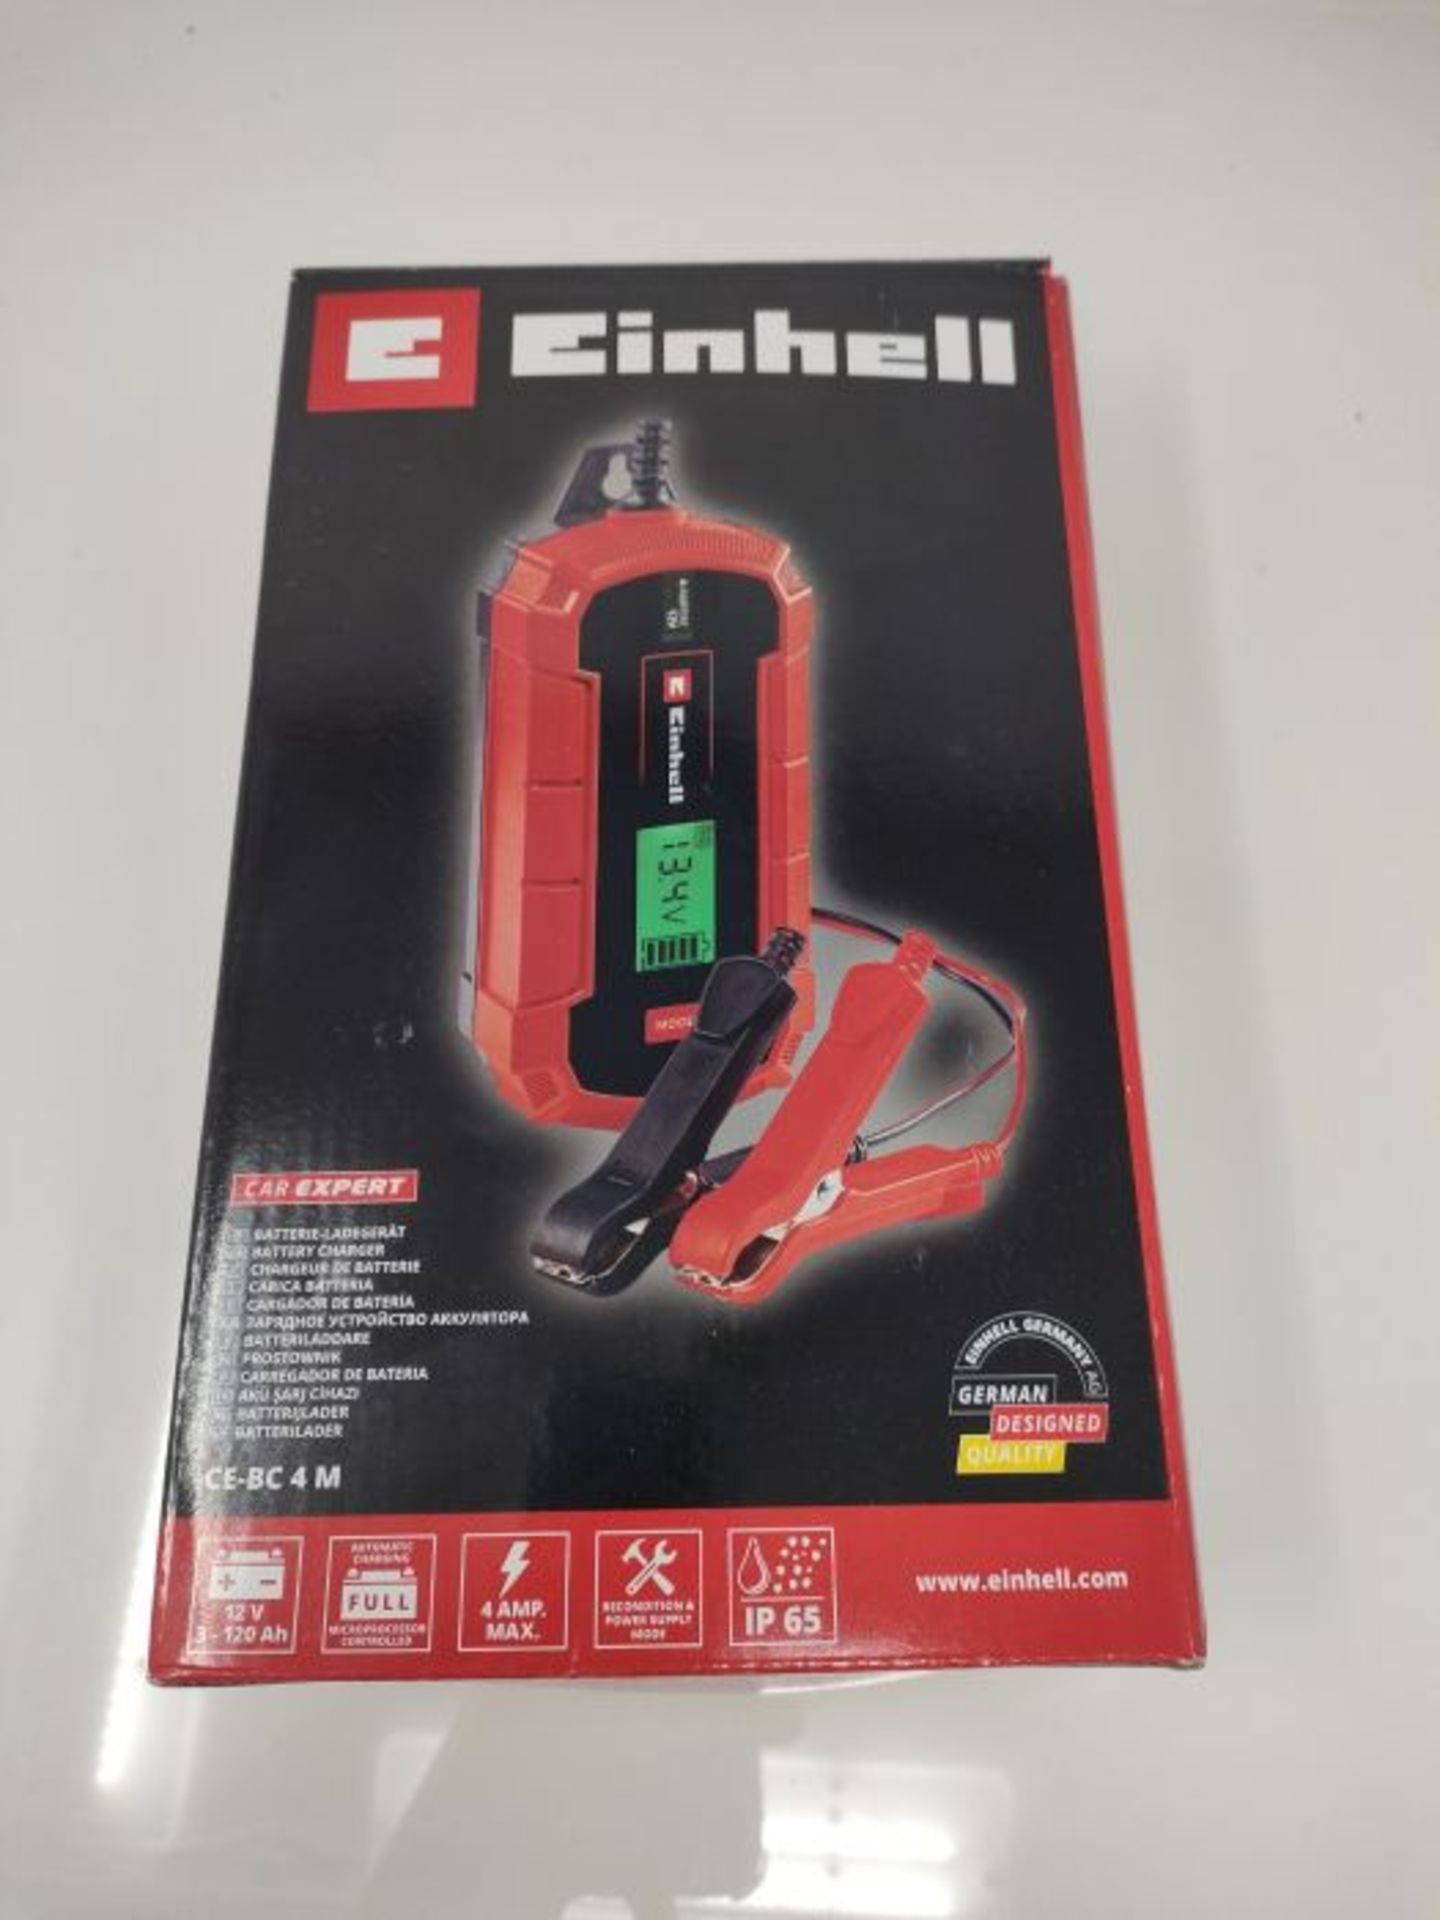 Einhell 1002225 Battery Charger CE-BC 4 M (Intelligent Battery Charger with Microproce - Image 2 of 3